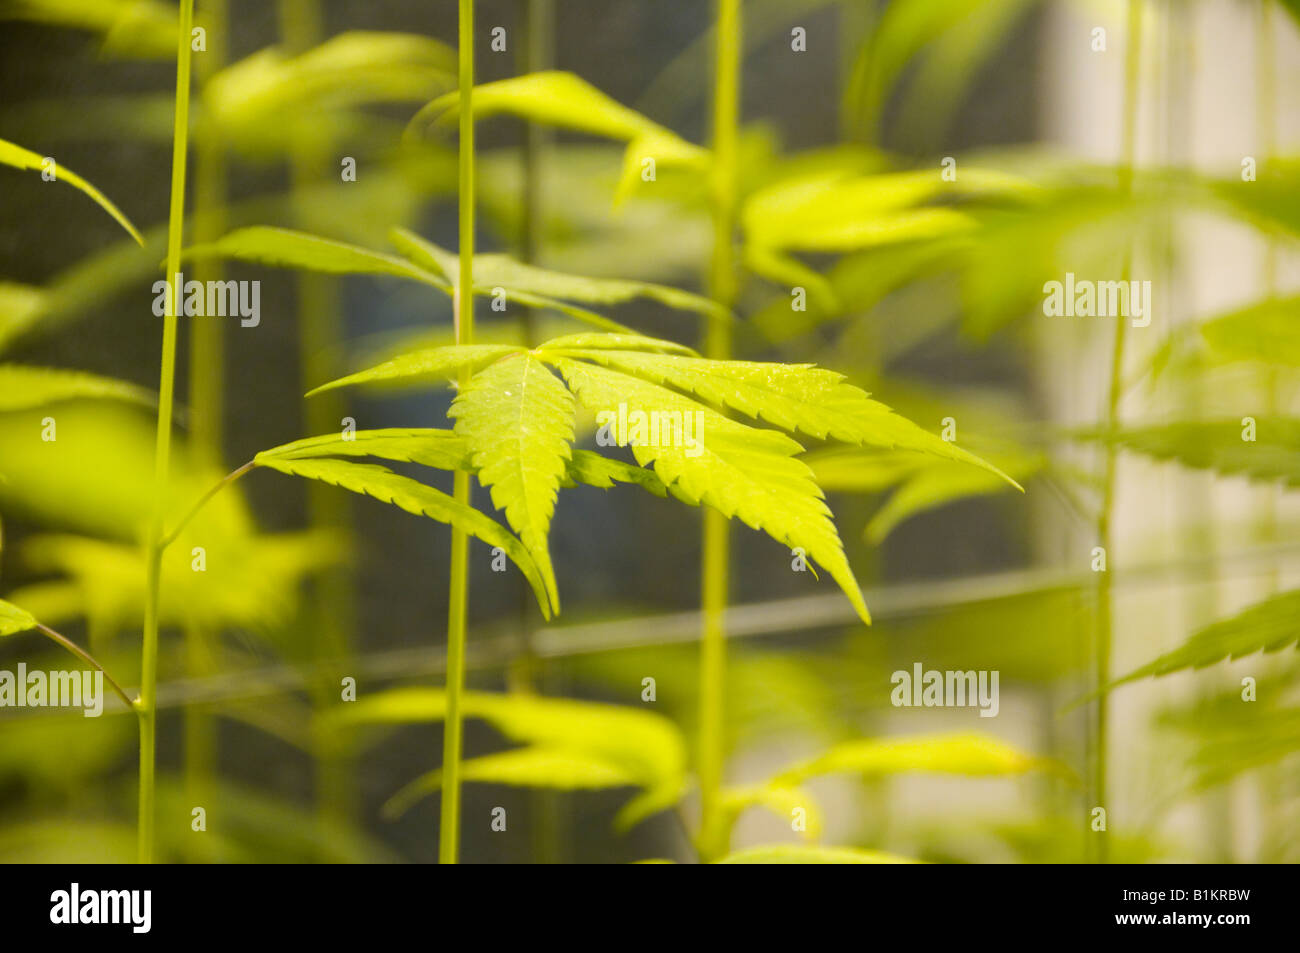 Cannabis plant nursery at Hanf Museum which provides a comprehensive view of the wide range of possibilities of the cultural plant Cannabis, Berlin Stock Photo